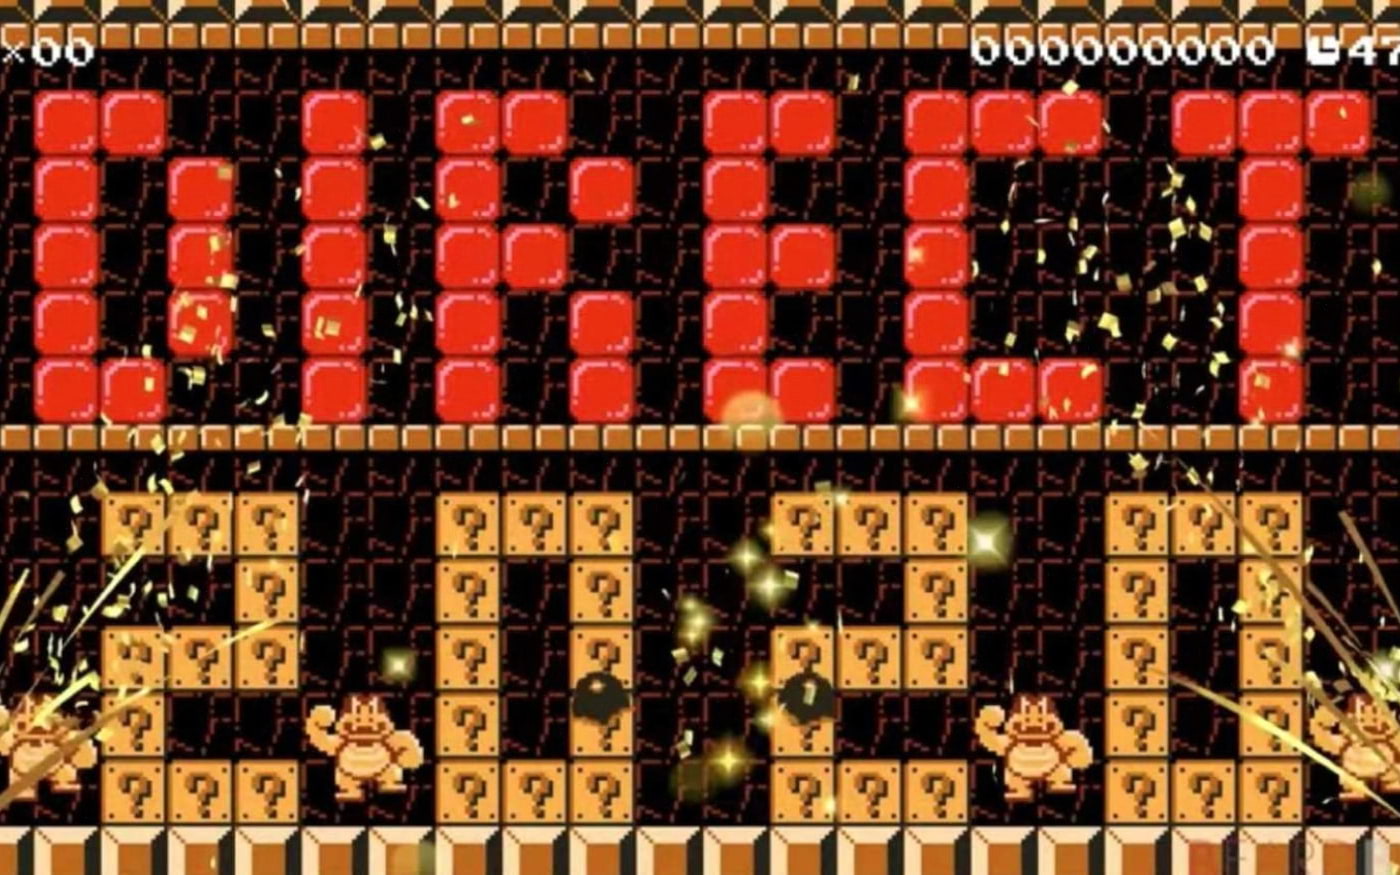 Fan gets tired of waiting and creates his own Nintendo Direct with Super Mario Maker 2 phase